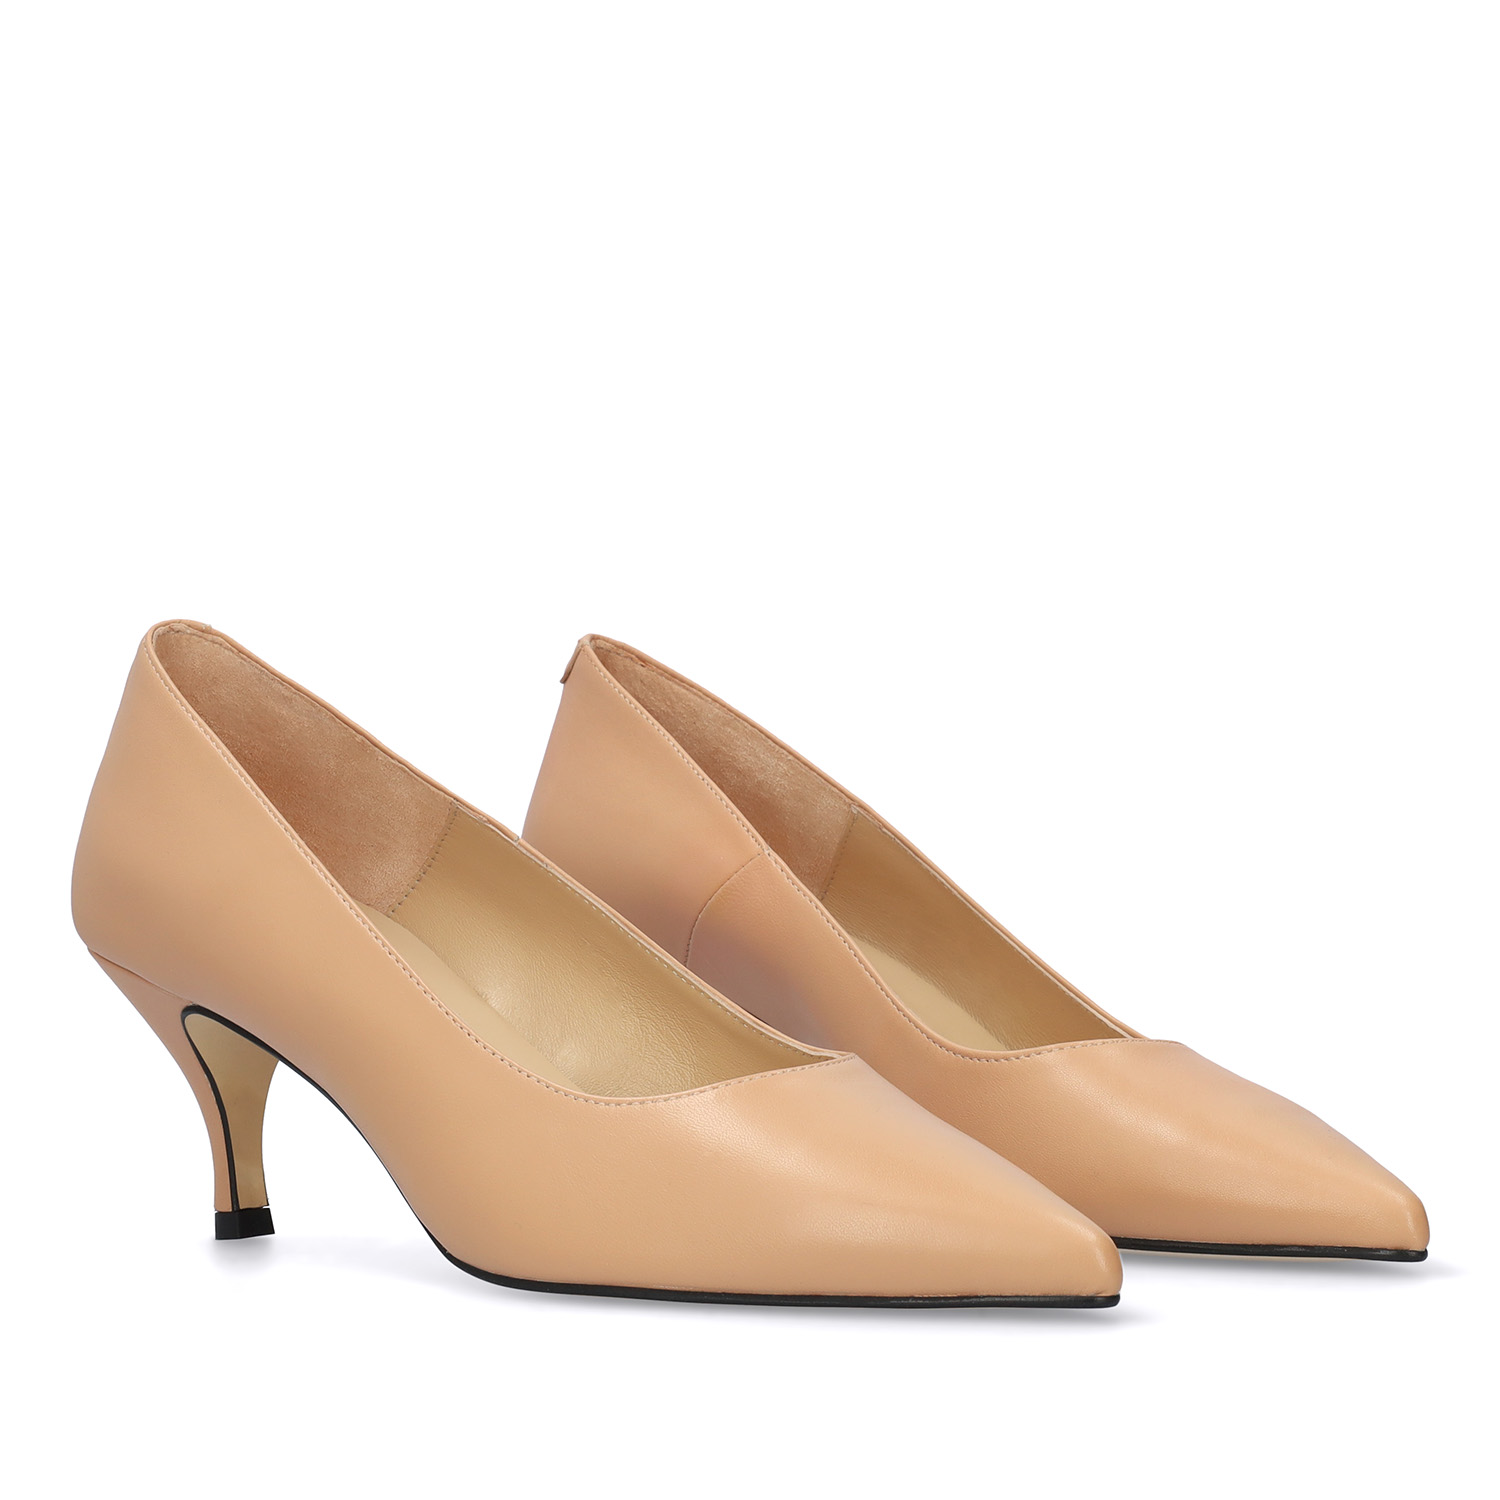 Pumps in Nude Nappa Leather 